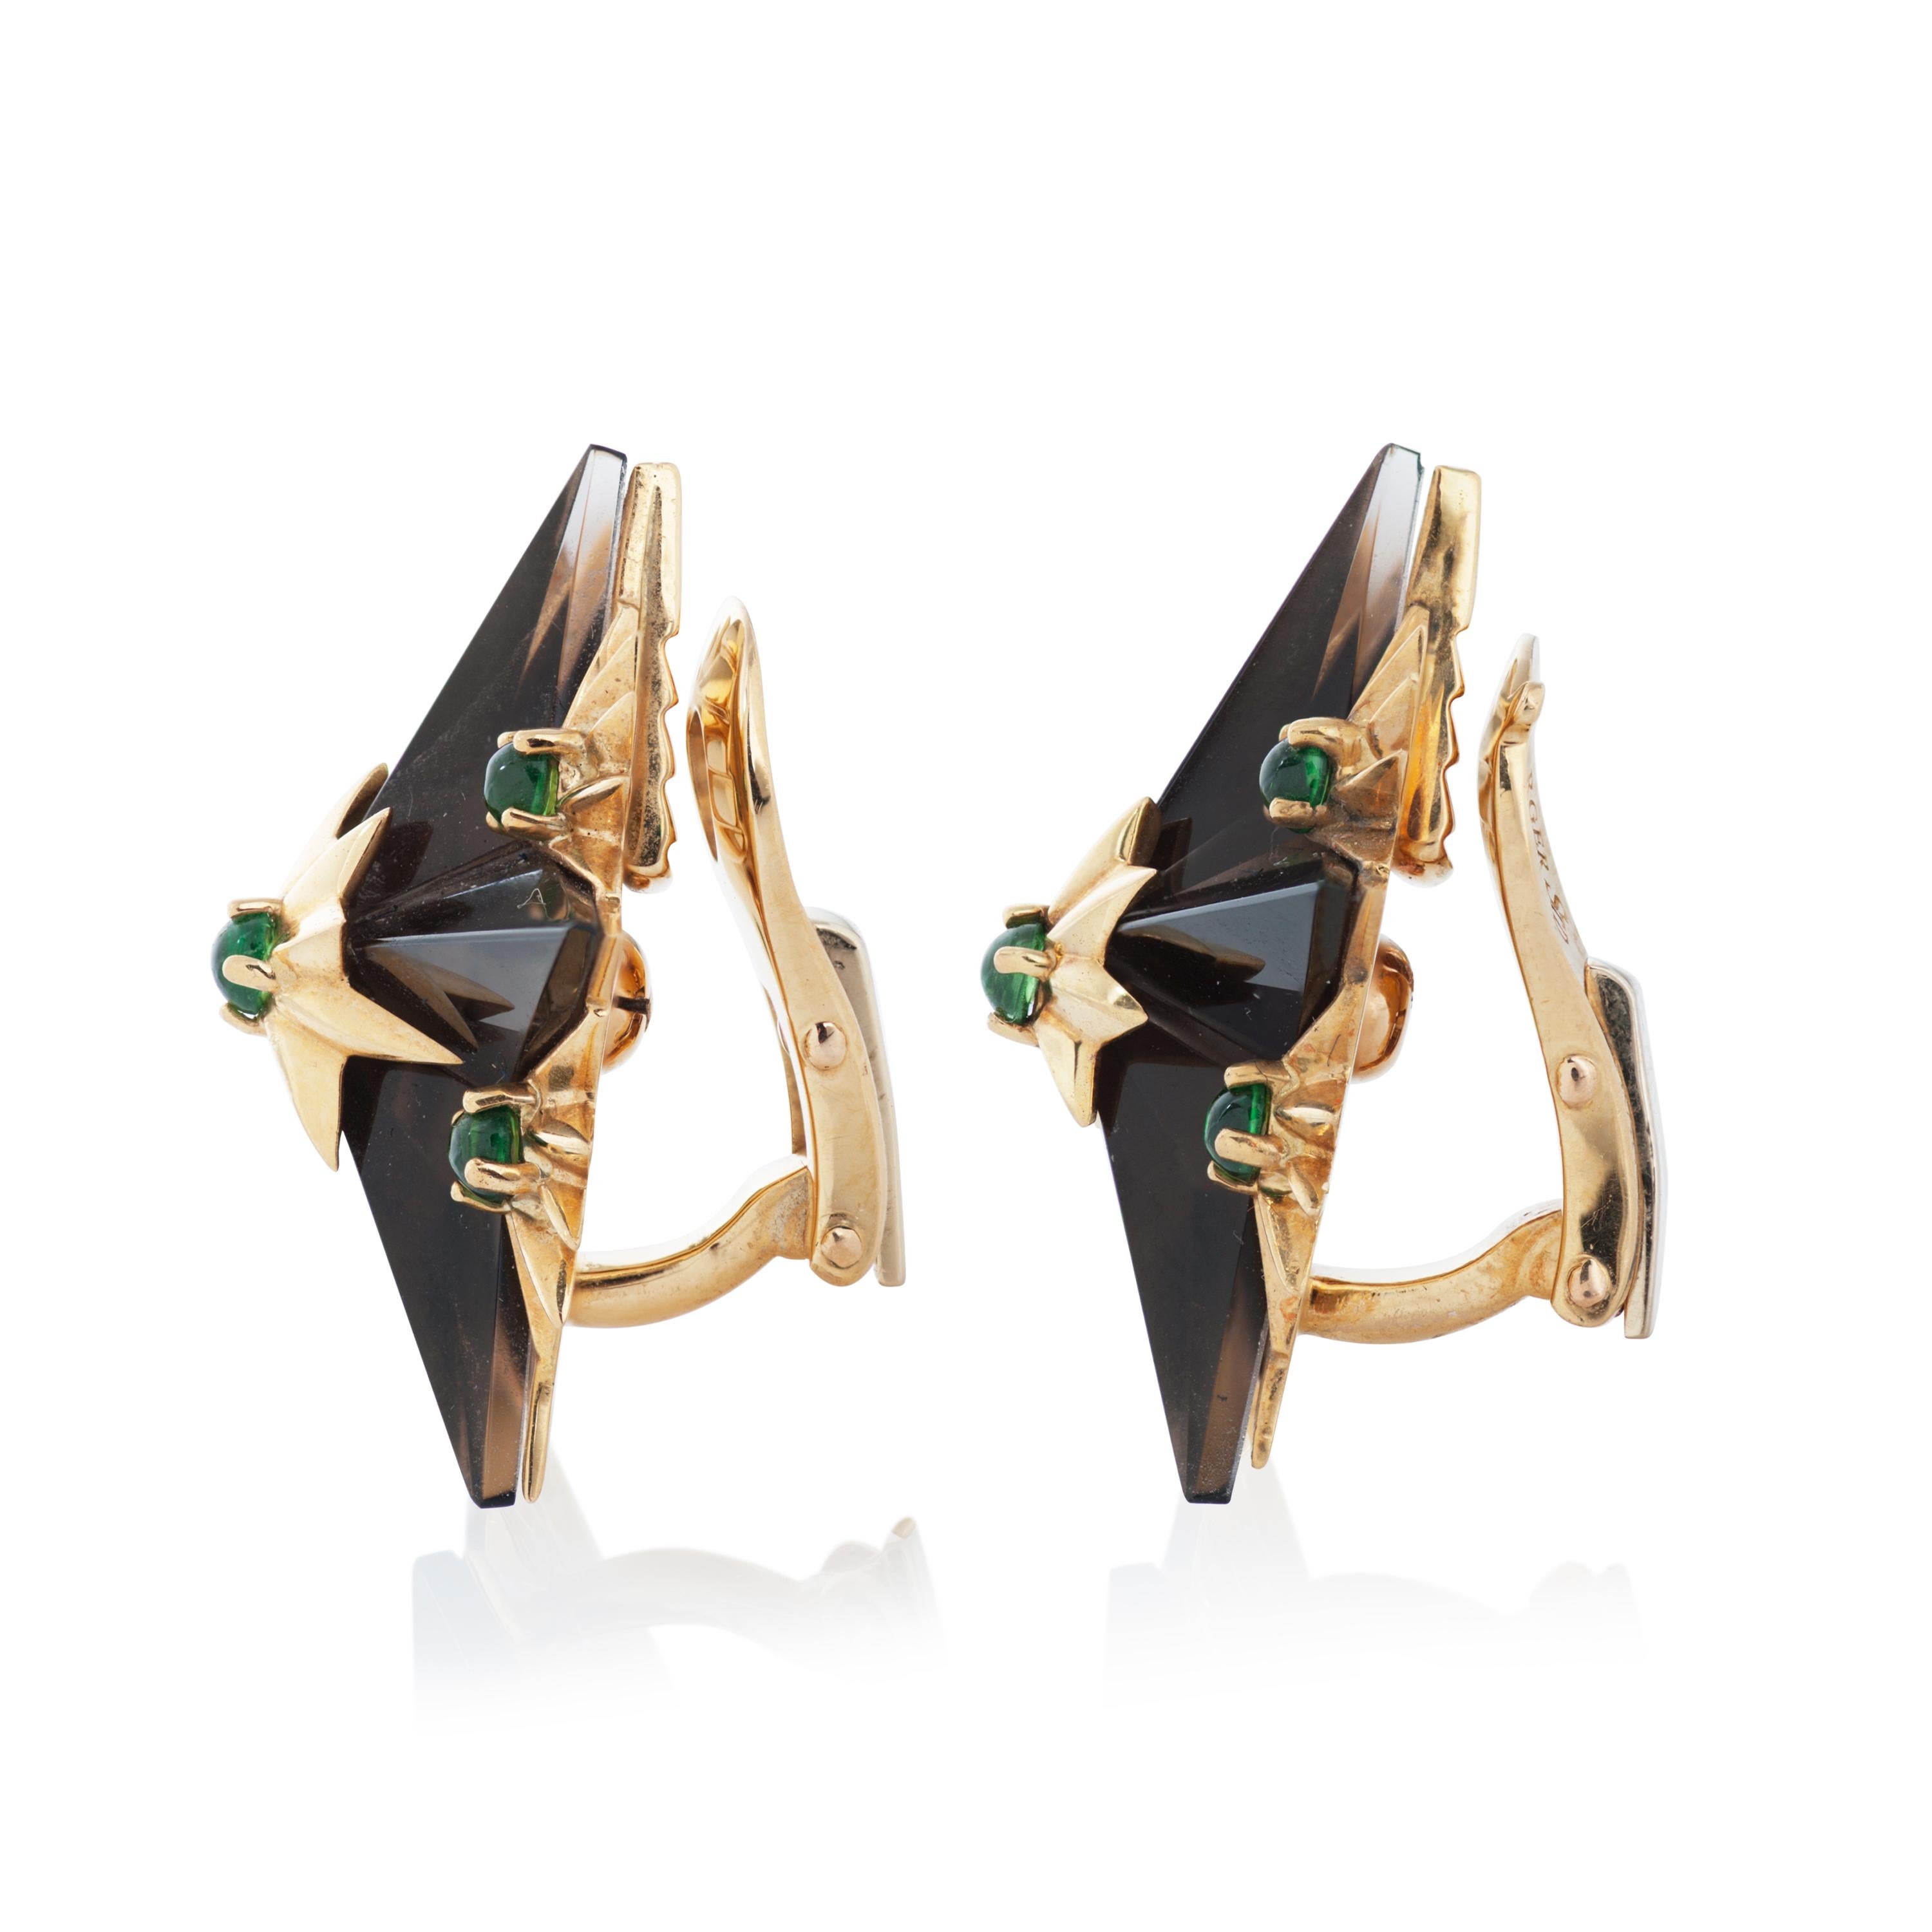 Vintage Tiffany & Co. Schlumberger smoky quartz and green tsavorite garnet starburst clip-on earrings in 18k yellow gold.

This pair of earrings features 2 star shaped smoky quartz accented by 12 round cabochon tsavorite garnets, set in 18k yellow